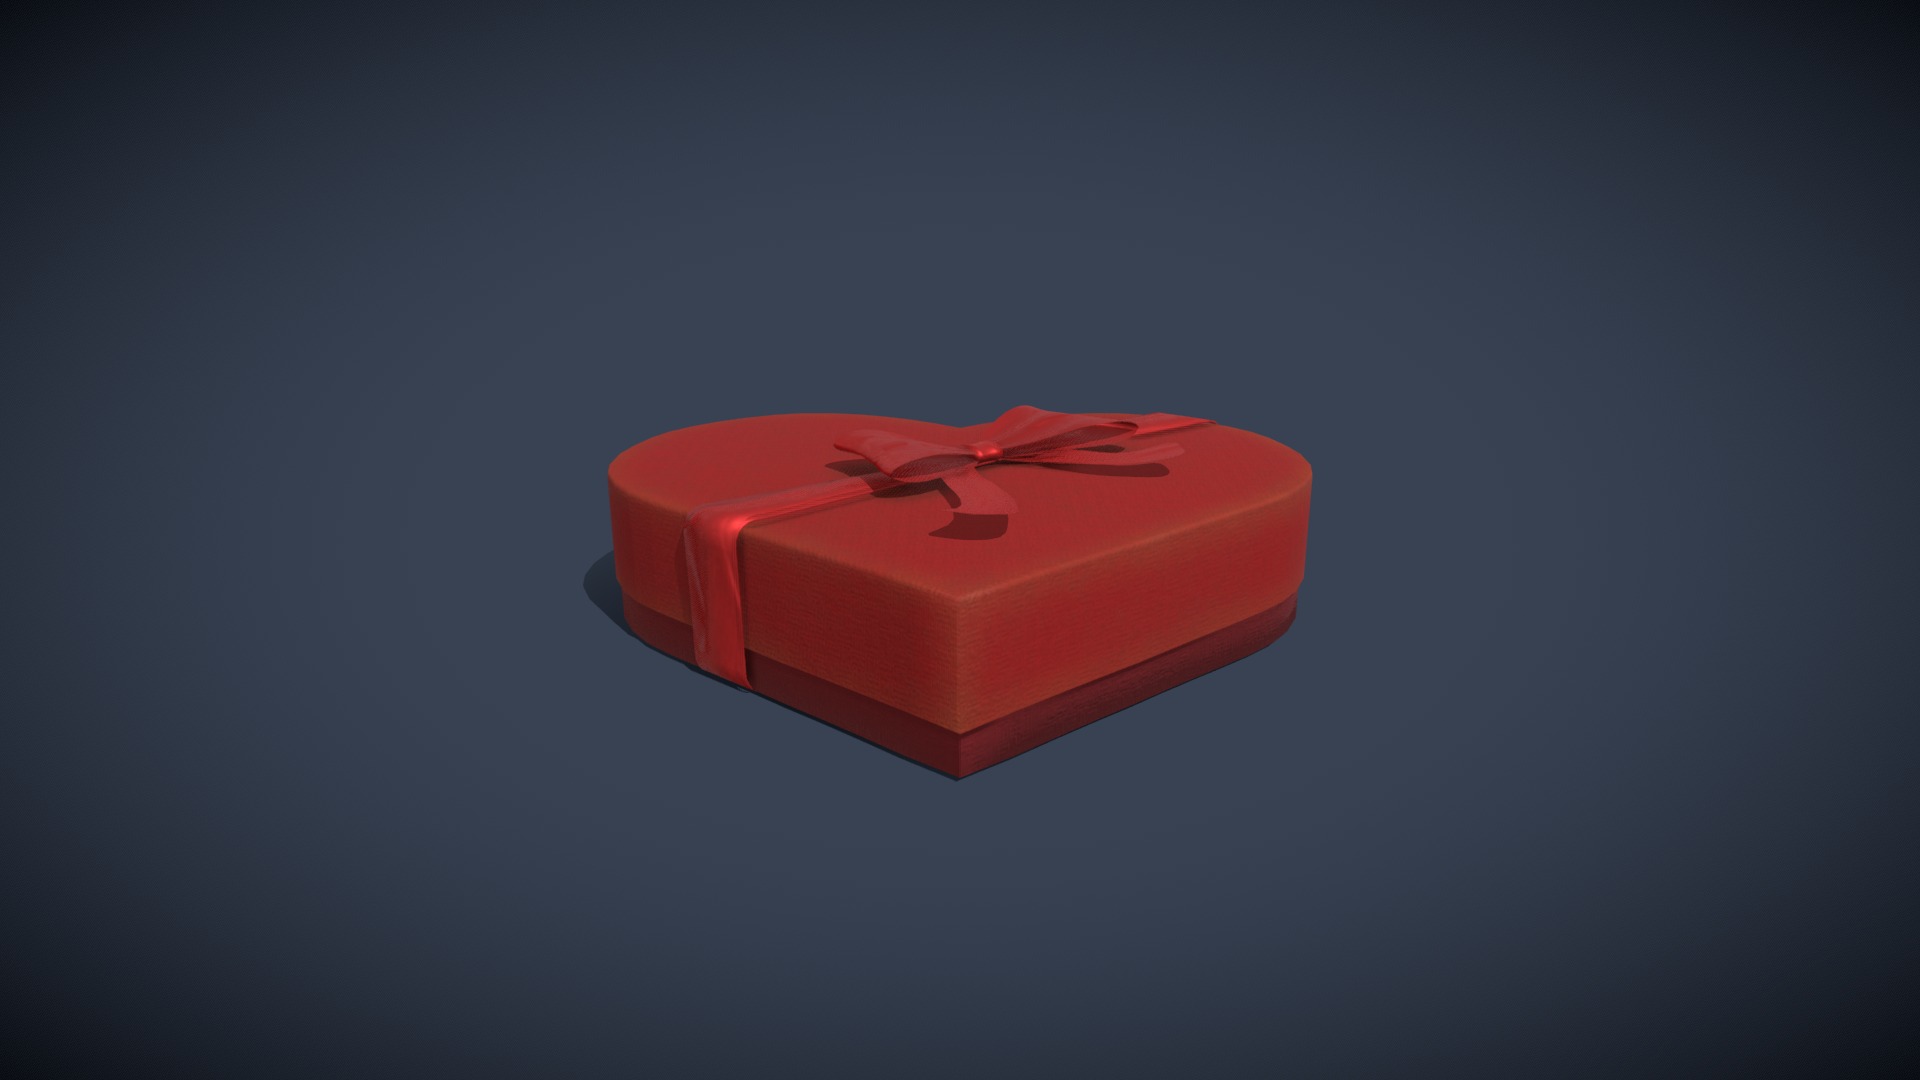 3D model Heart Shaped Present 3D Model - This is a 3D model of the Heart Shaped Present 3D Model. The 3D model is about a red box with a black background.